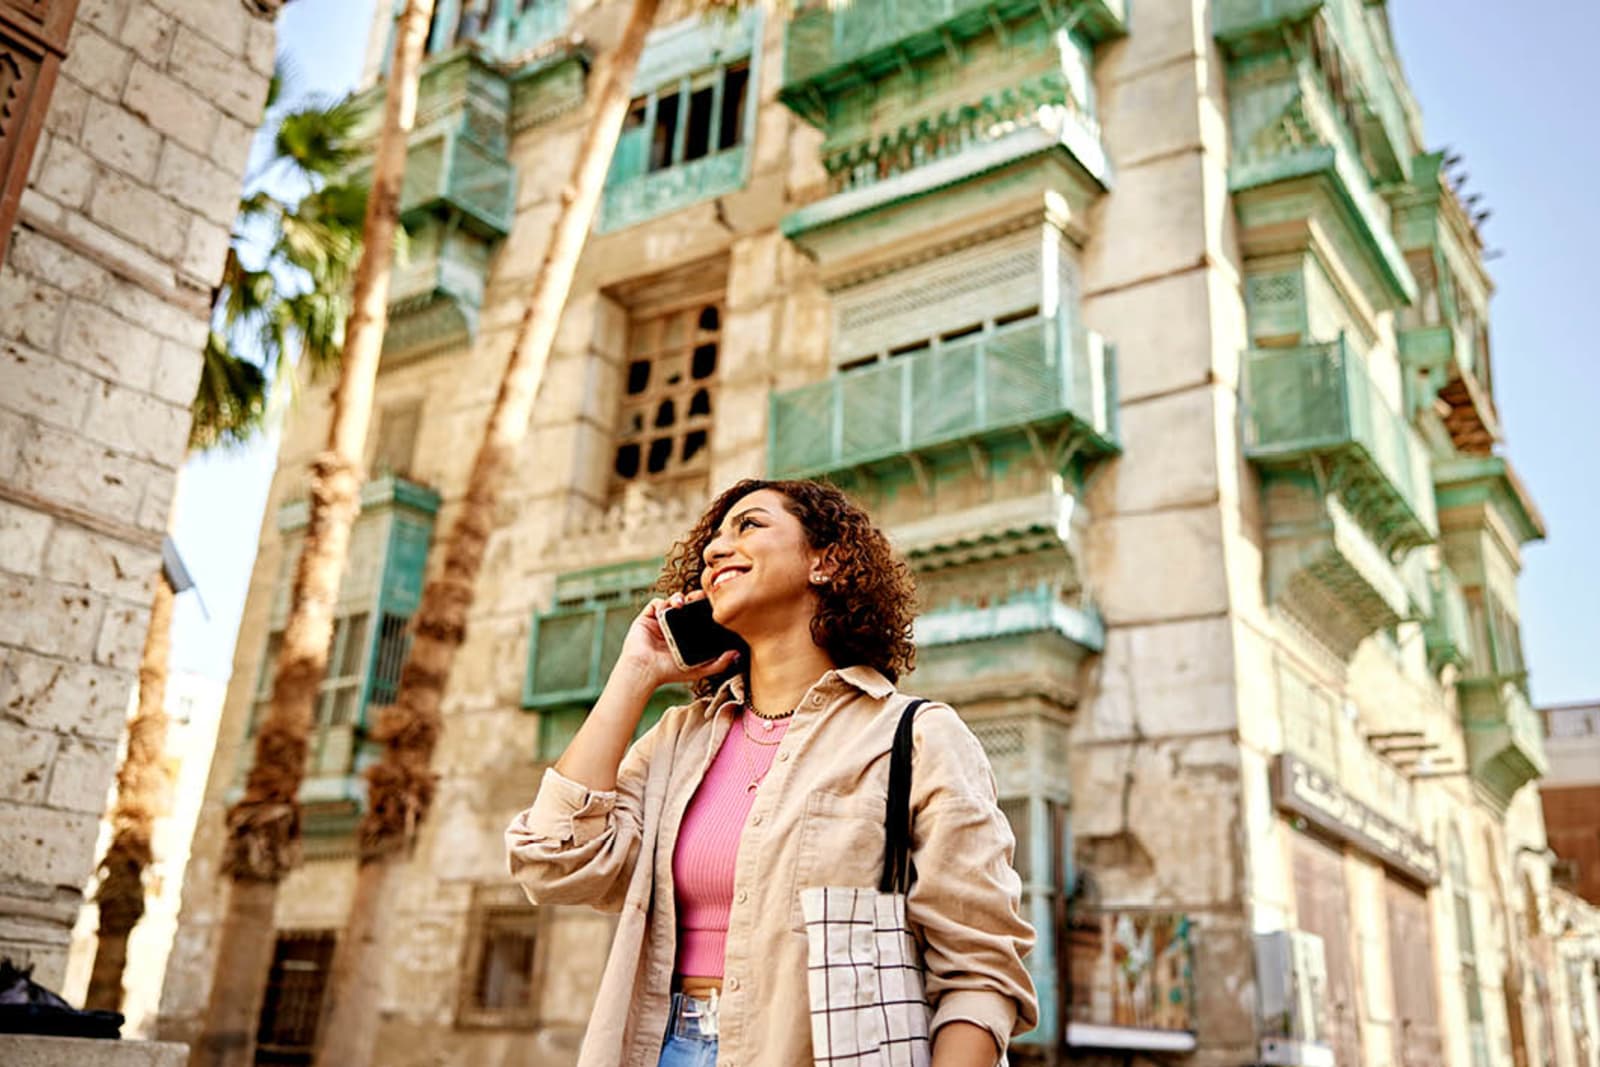 A woman in Al-Balad; she's speaking on a cell phone